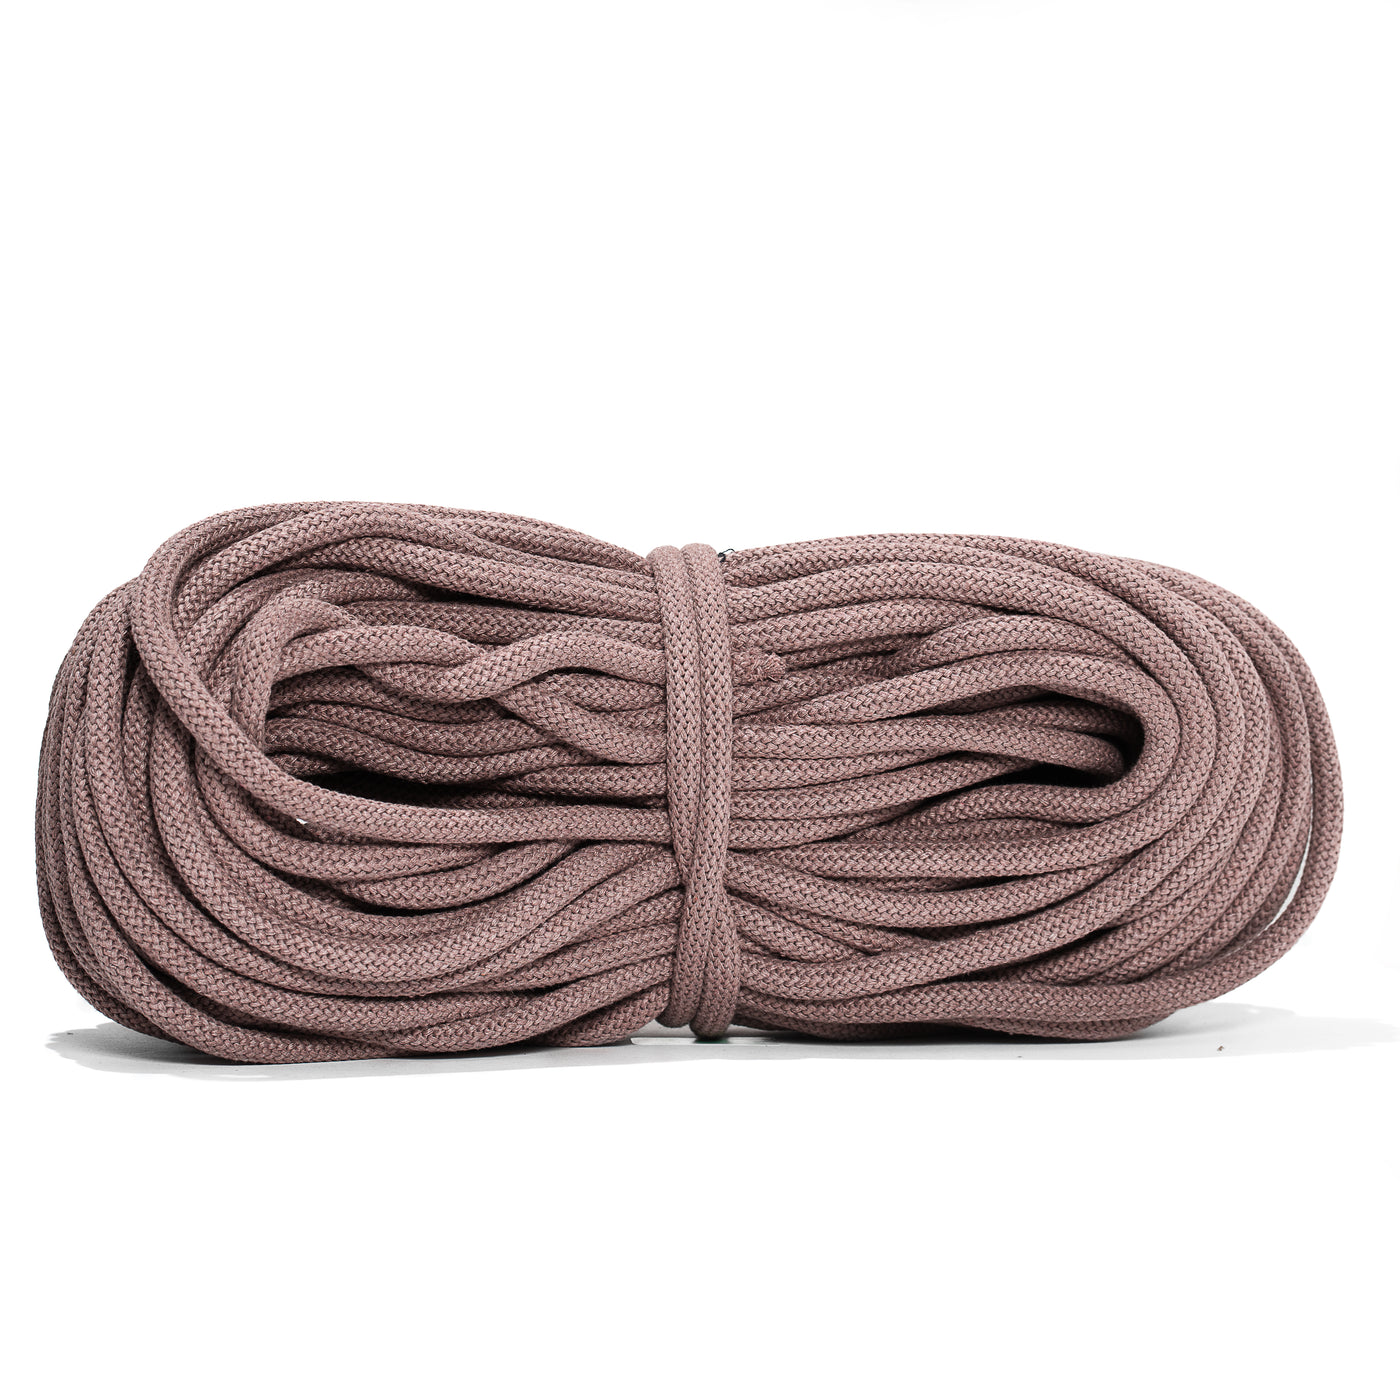 Braided Recycled Cotton Cord 9mm - Mink